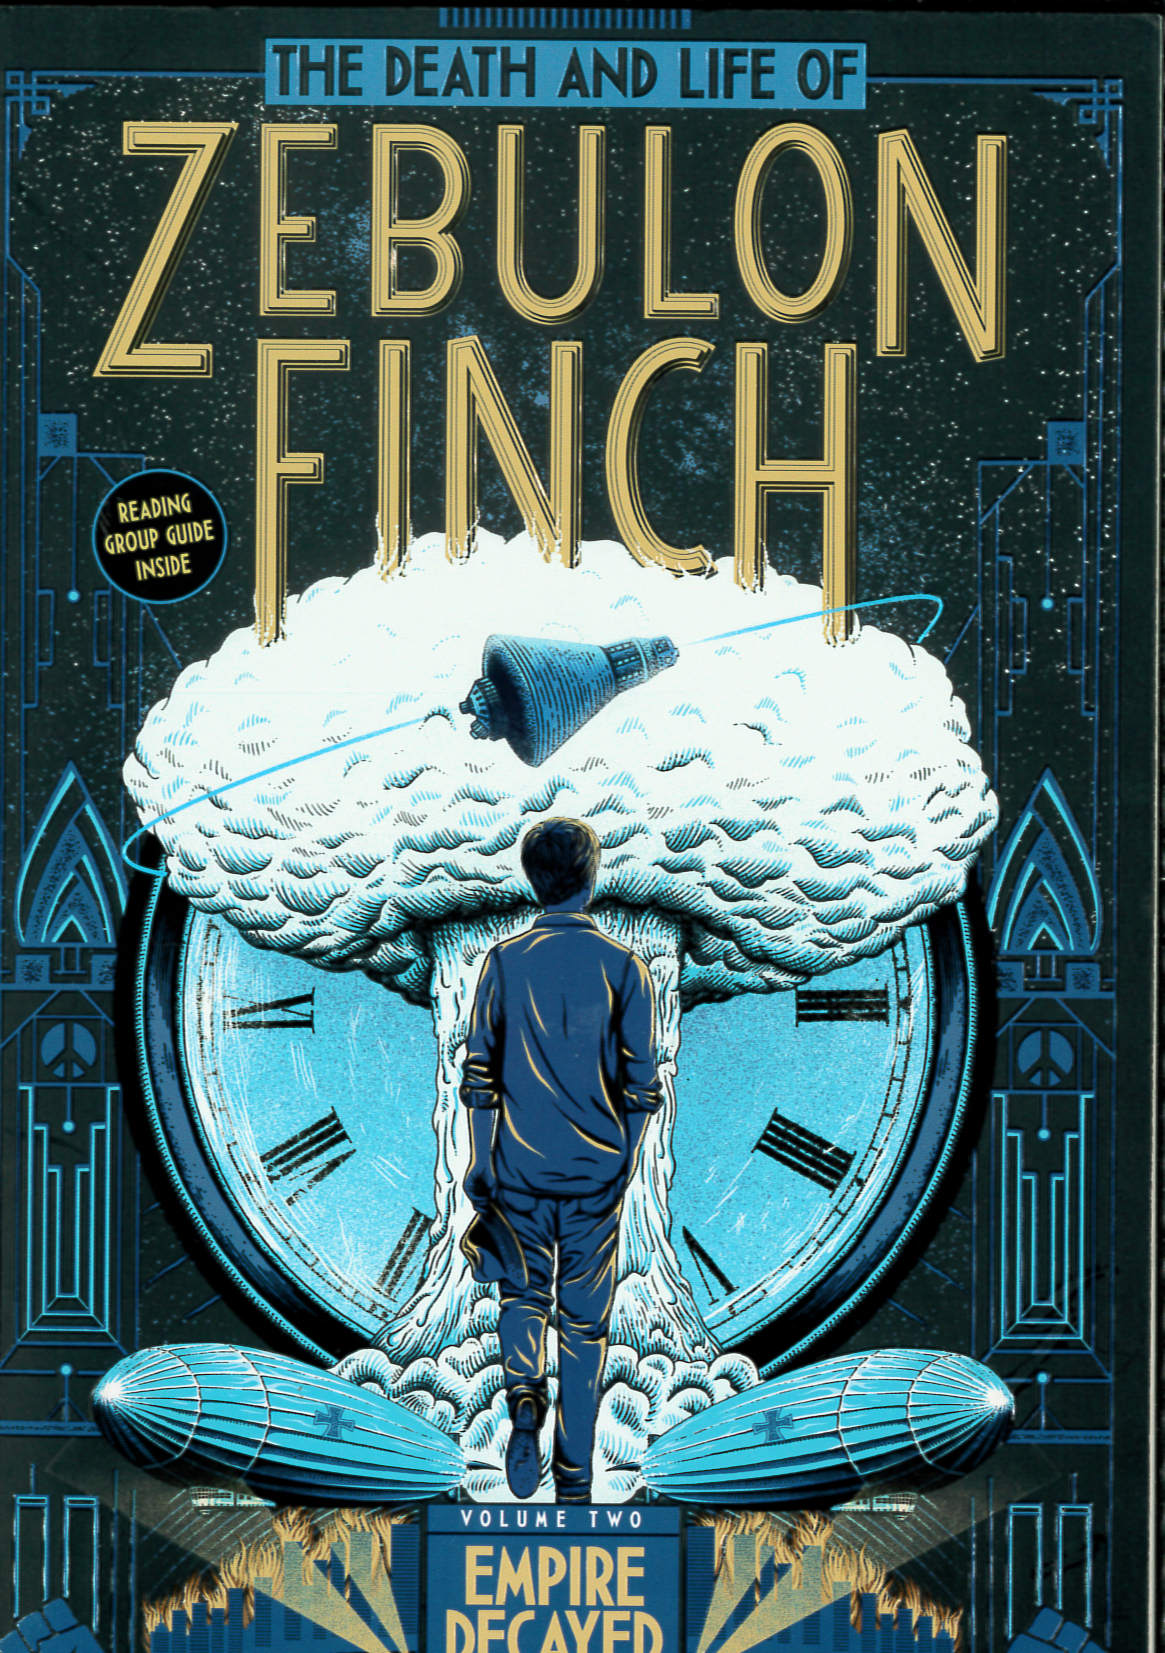 The death and life of Zebulon Finch. Volume two, Empire decayed